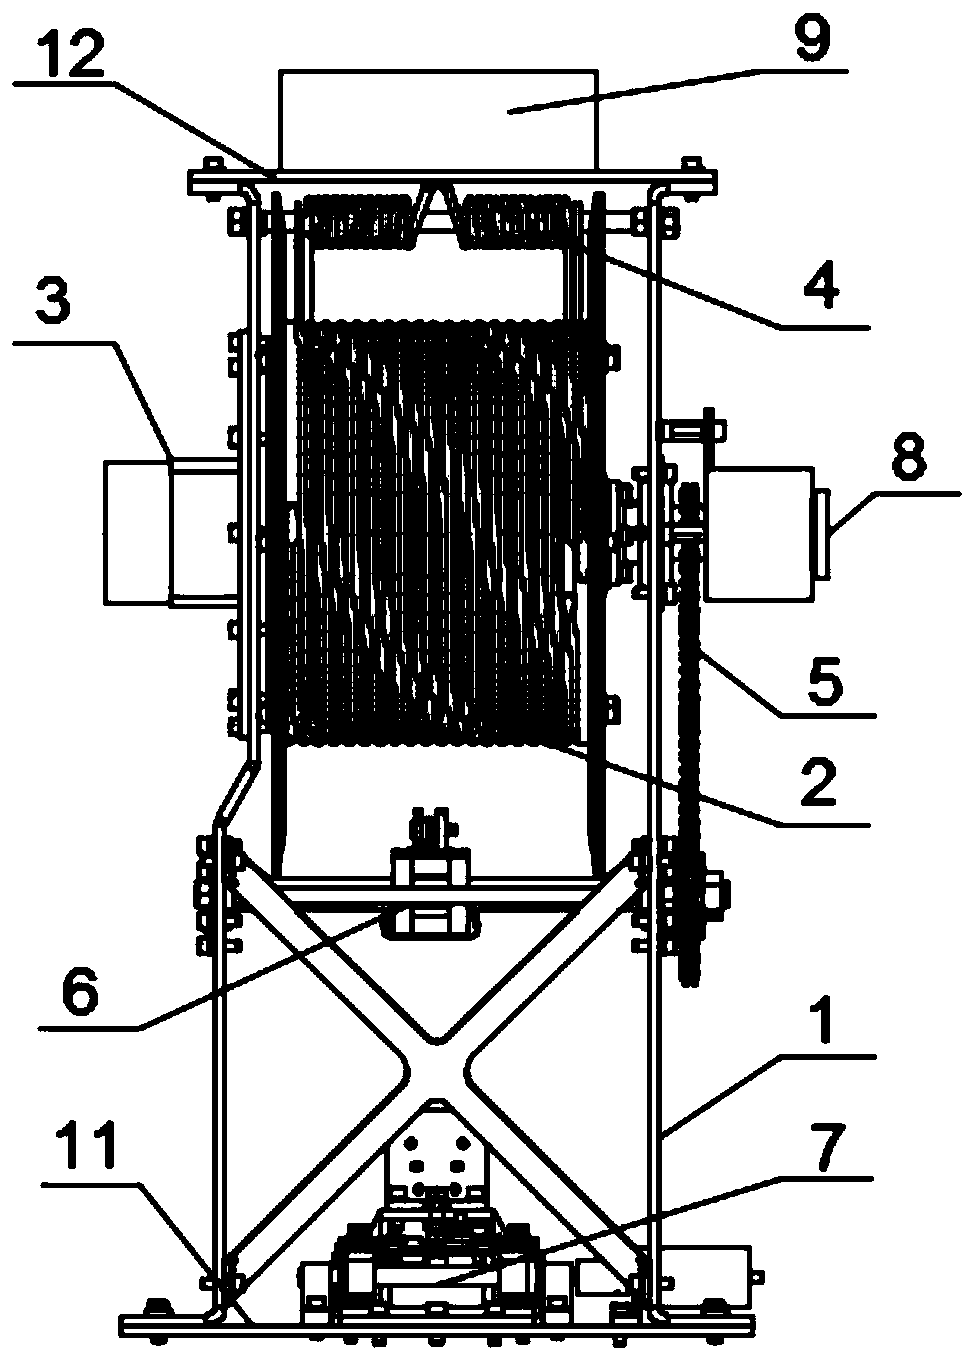 Mini winch for storing and placing detecting instrument on air water interface